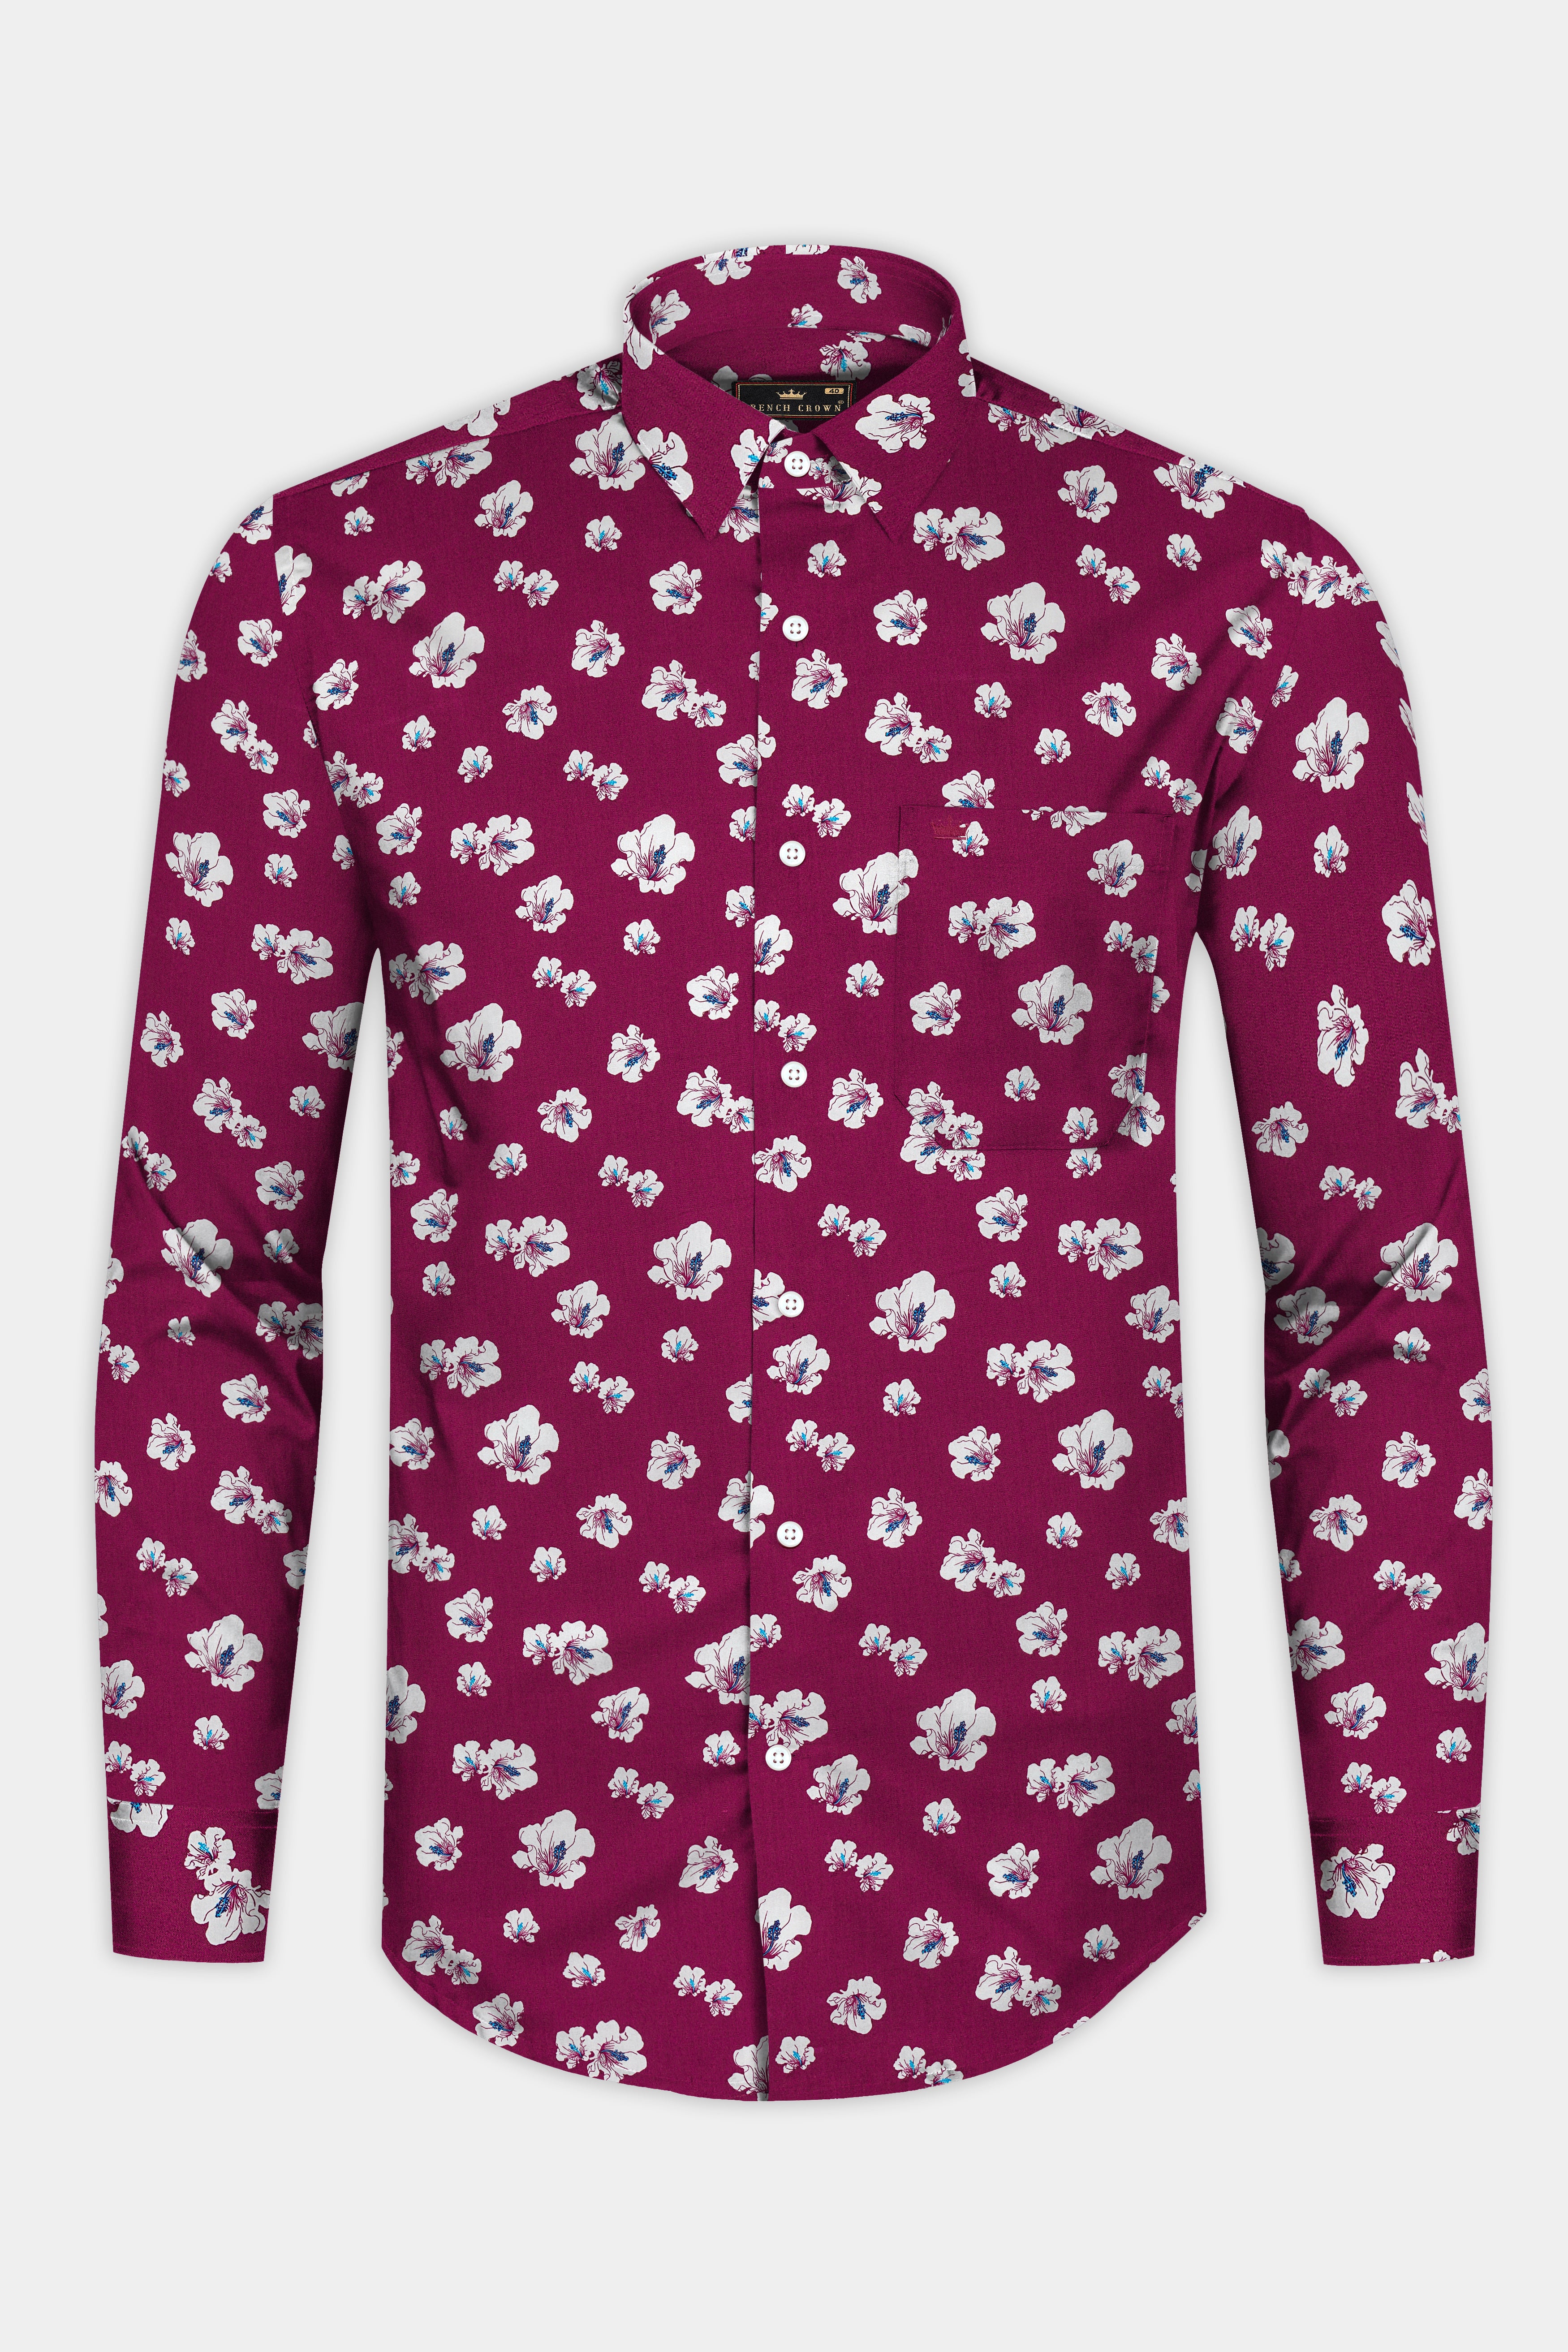 Camelot Red Floral Printed Twill Premium Cotton Shirt